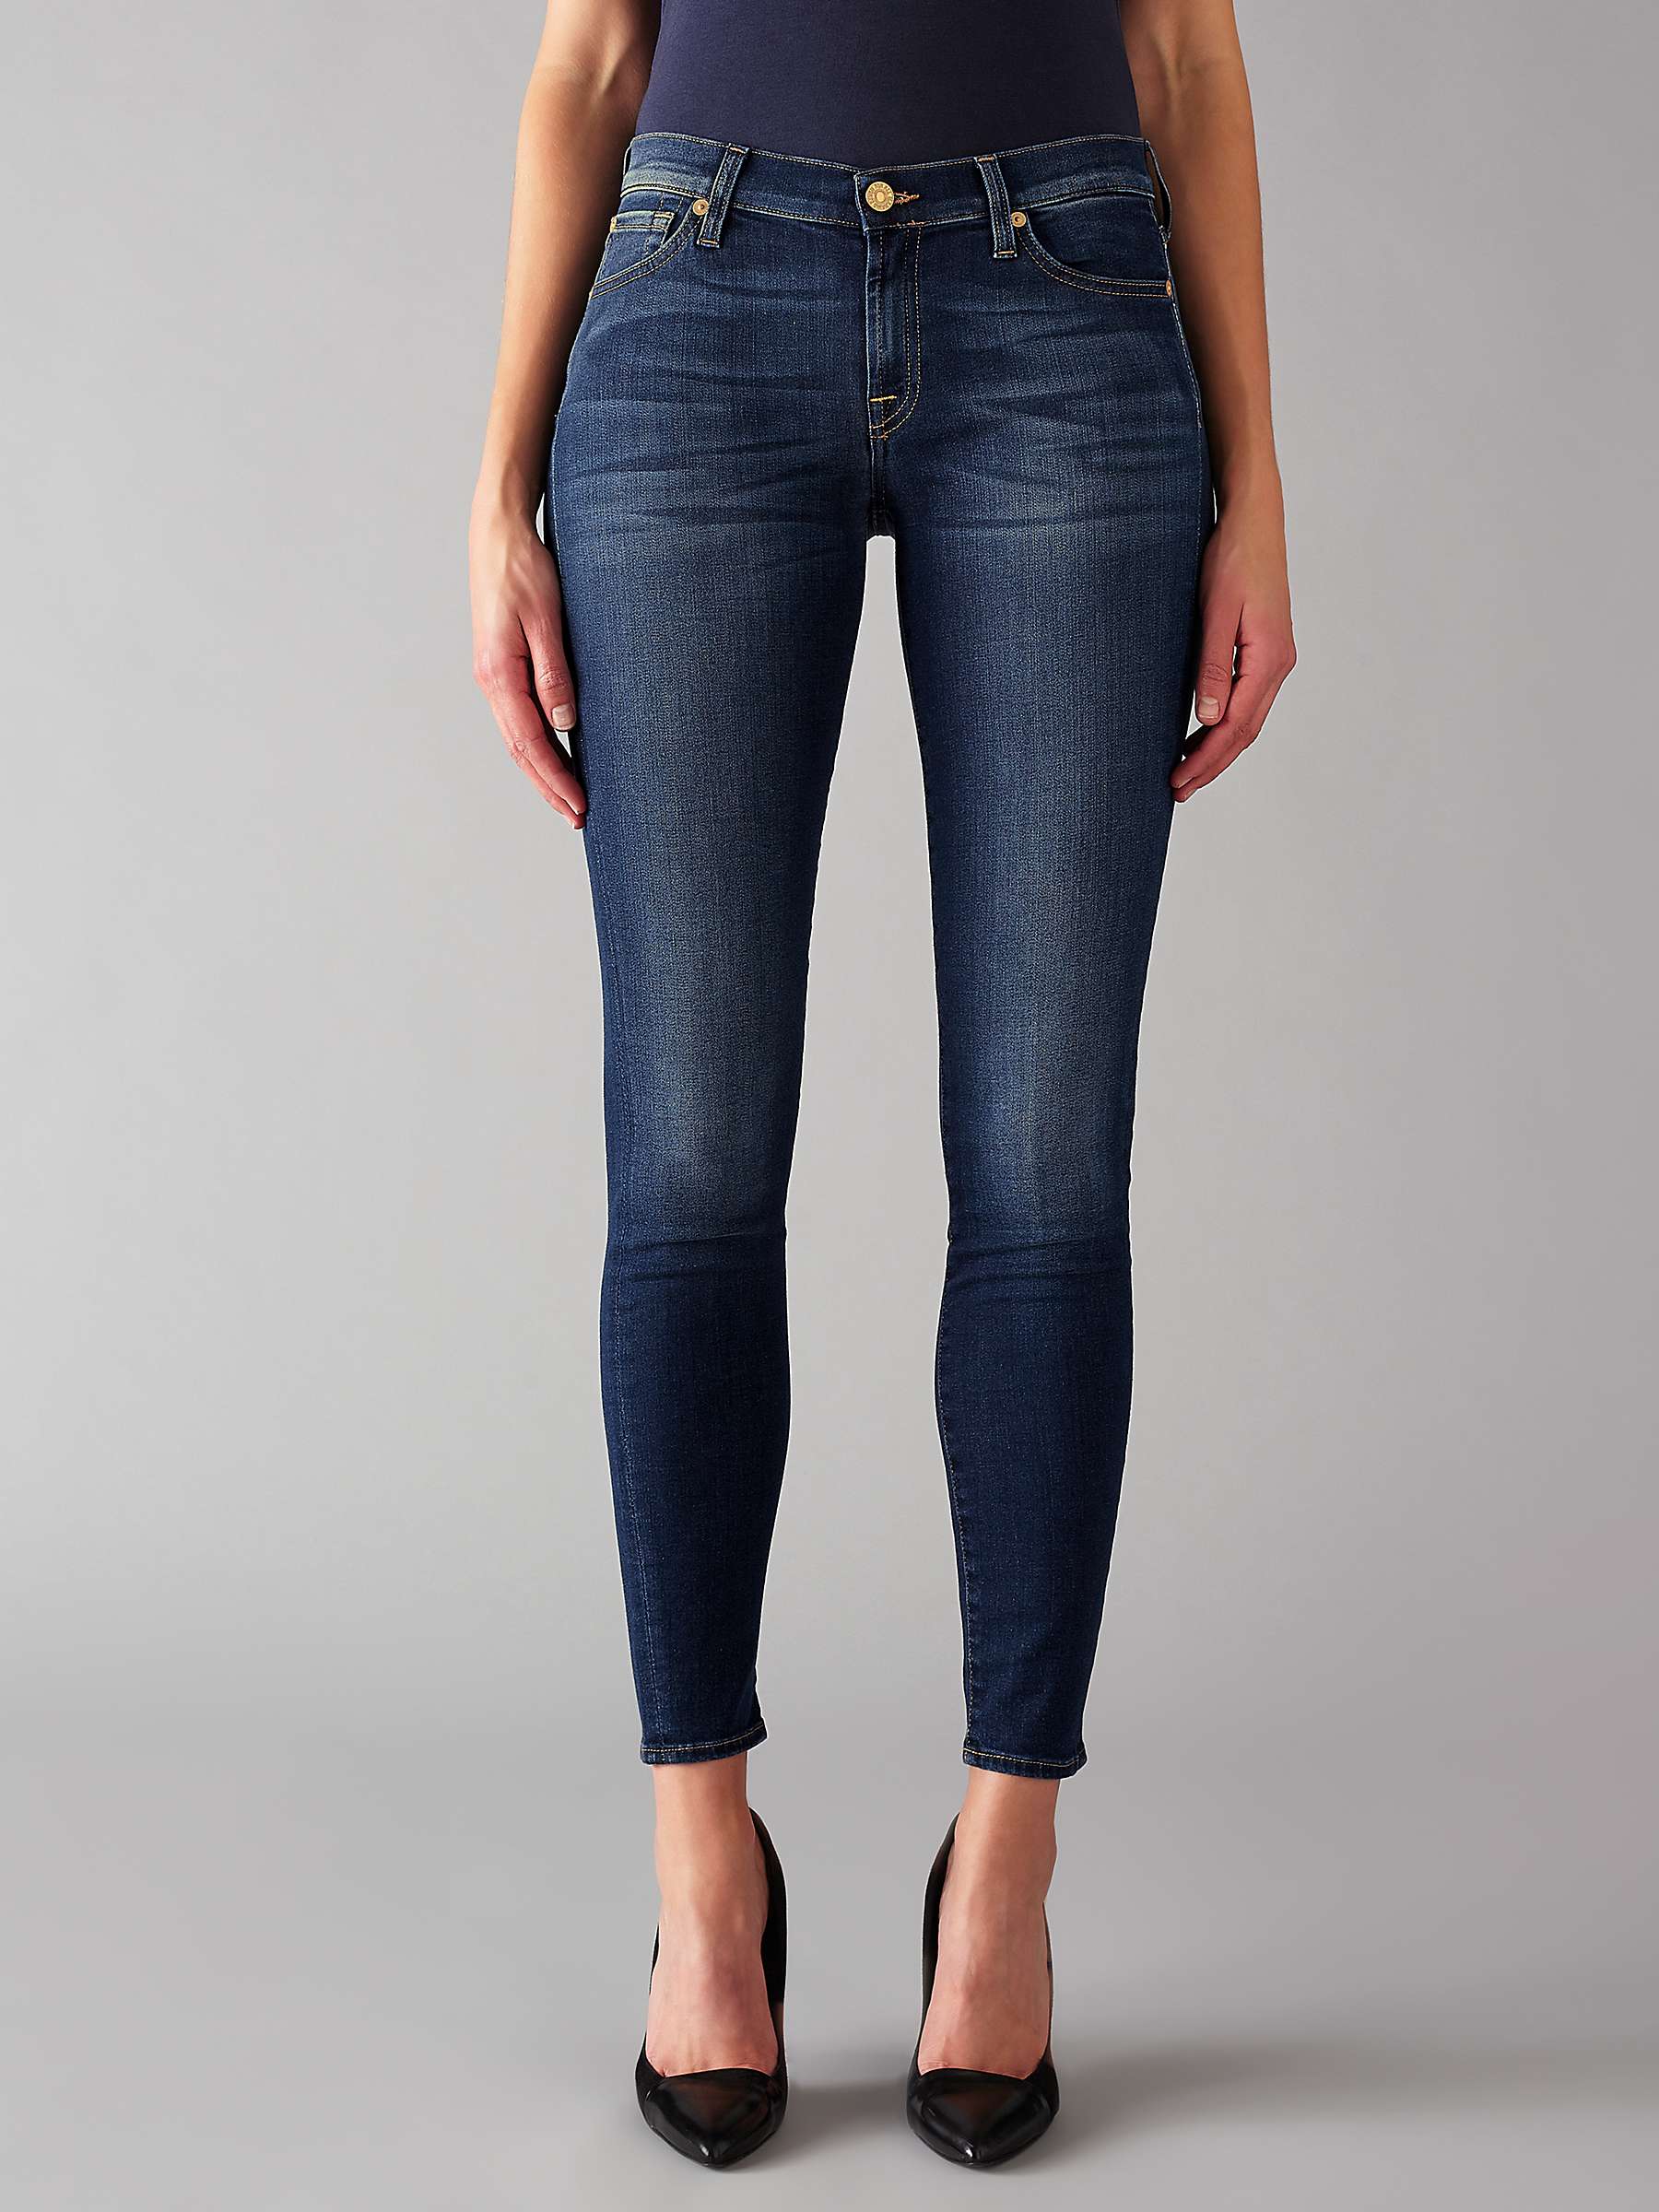 7 For All Mankind The Skinny B Air Jeans Duchess At John Lewis Partners